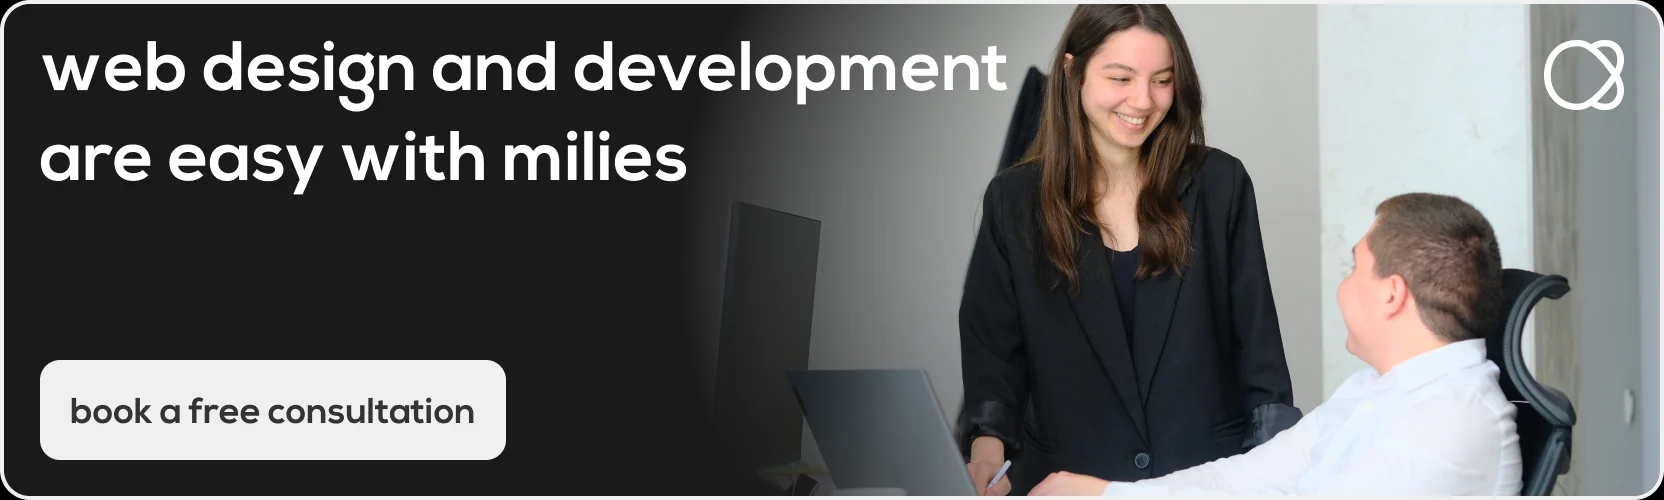 Web development and design are easy with Milies